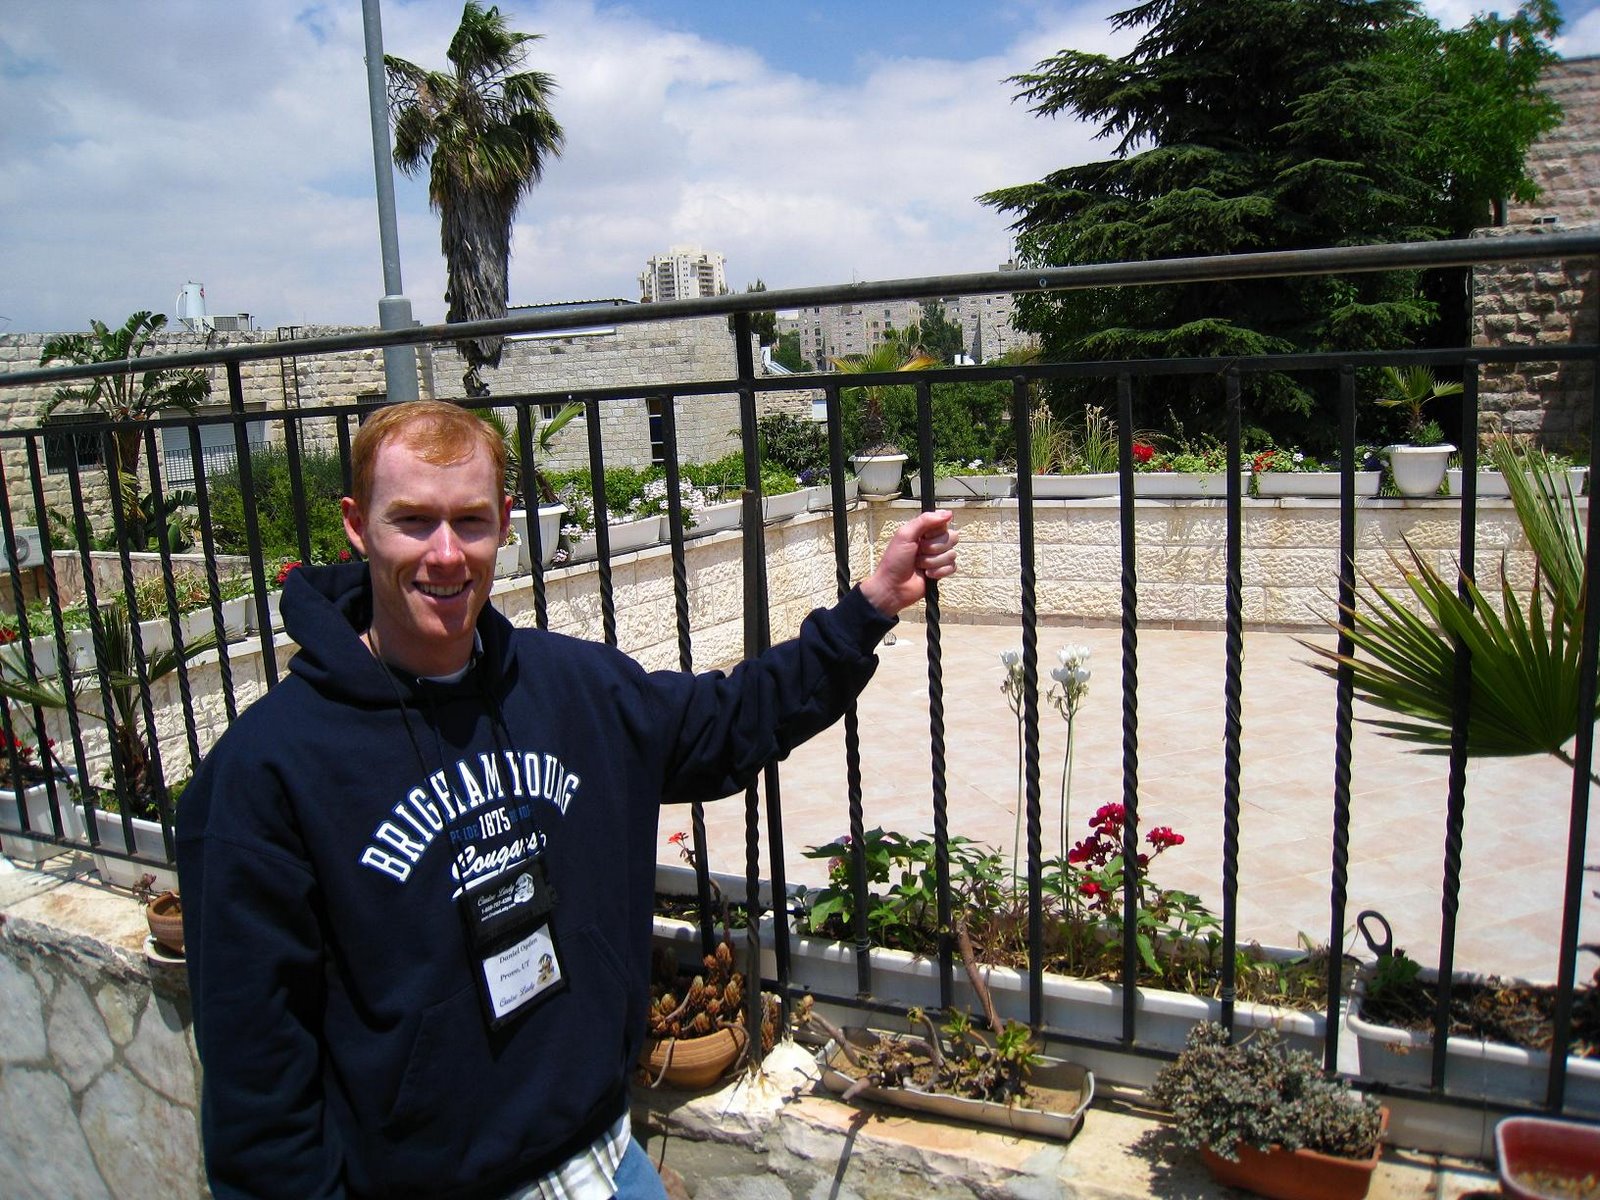 [Patio+at+old+home+in+Jerusalem.JPG]